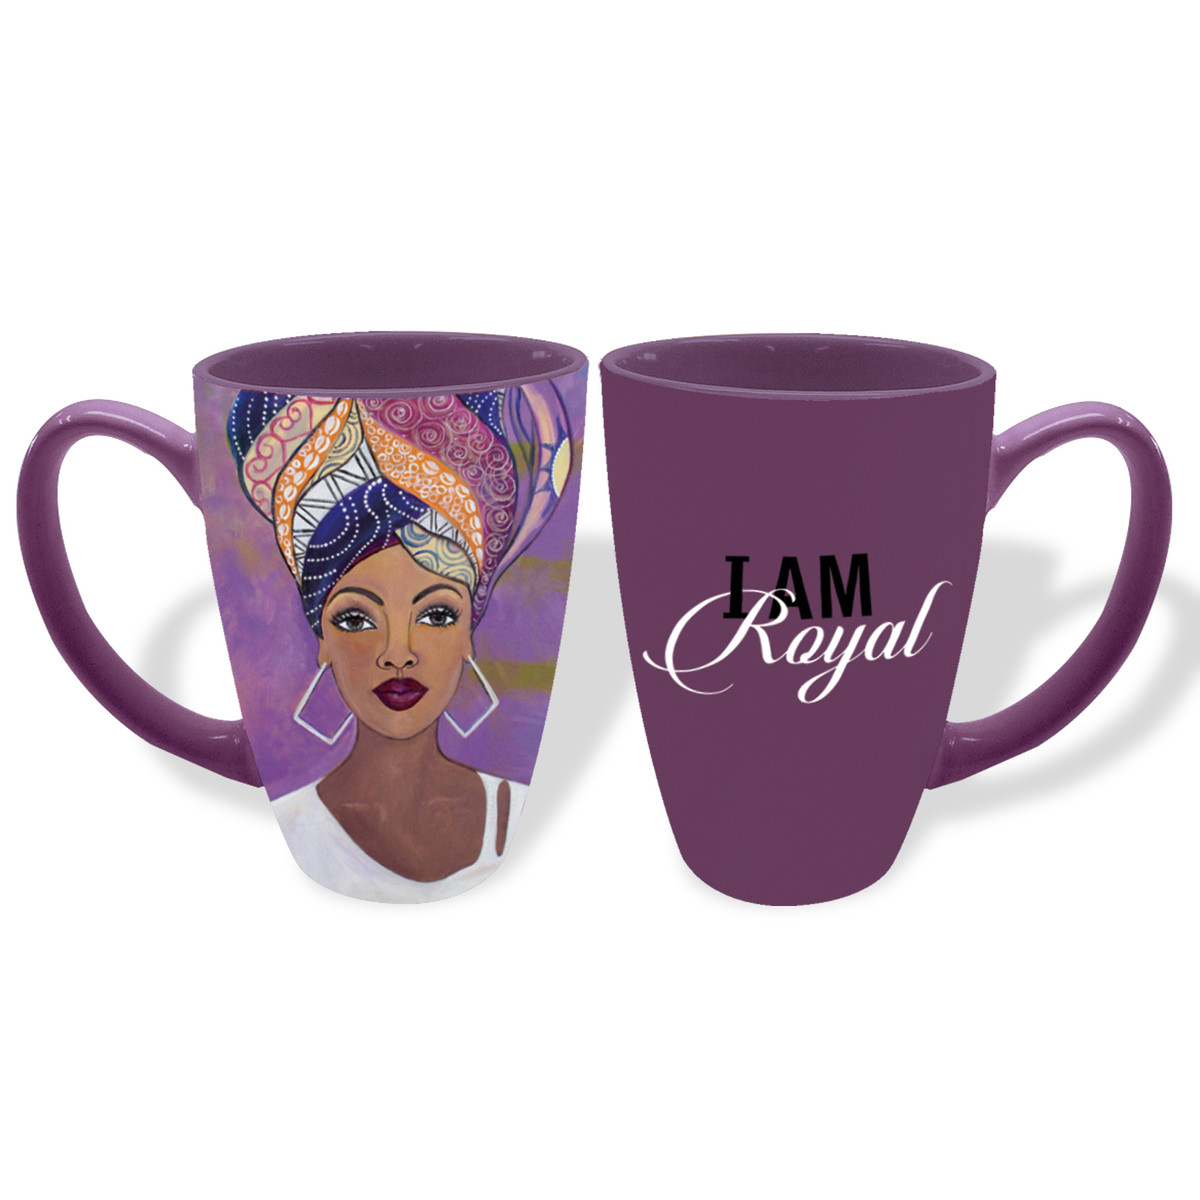 Latte Mugs- "I Am Royal" By Slyvia "G Baby" Phillips